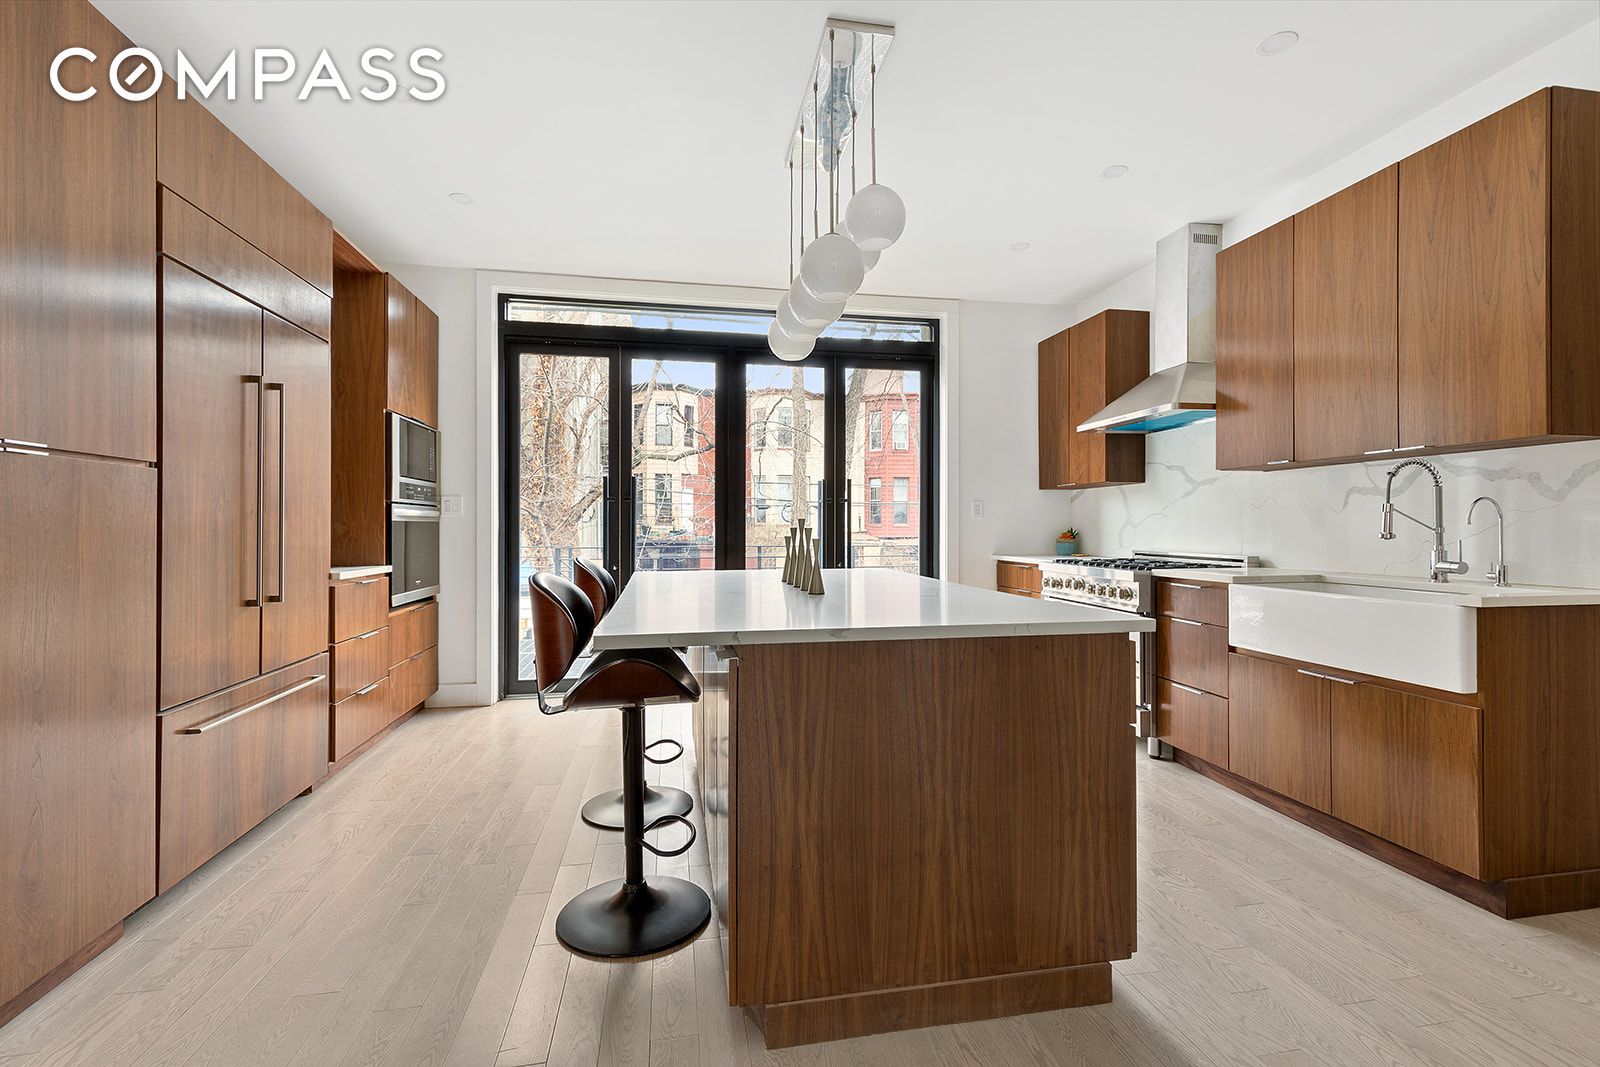 Gut-renovated and completely redesigned to combine modern style with classic accents, 451 Hancock Street is a stunning two-family, three story brownstone in the heart of historic Bed-Stuy, Brooklyn.

As you enter the owner's duplex on the parlor level, you're greeted by a light and lofty living space with new white oak floors and flooded by natural lighta warm and hospitable place to come home to, with a powder room and plenty of closet space. But in truth, the kitchen is the main event here. Wide and welcoming, it spans the entire width of the home, capped on the northern end with tall glass doors that open right onto a large outdoor deck (dining al fresco, anyone?). Light marble countertops and a large porcelain farmhouse sink contrast with richly-stained custom cabinetry, as stylish pendant lights dangle above a large center island. The breakfast bar is the perfect place to have a nightcap or casual dinner, though there's more than enough room for a dining table. Featuring all-new applianceslike a stainless steel gas range with vented hood, in-island dishwasher, and an extra-wide 42' refrigerator with French doors paneled to match the cabinets that line the entire roomthis kitchen is enough to satisfy even the most demanding home chef. You've even got a microwave and wall oven combo, for that little bit of extra heat when extra heat is what's called for.

Following the stairs down to the garden level, you'll find two spacious bedrooms. The main bedroom features large dual closets and a doorway right out to your private backyard (also completely renovated, surrounded by wooden fencing and edged with rich garden soil). The en suite, five-piece bathroom has a shower, bathtub, toilet and double vanity, with a high-tech Bluetooth mirror for music in the morning and radiant heated floors. The secondary bedroom feels anything but secondary, with more than enough space for a king bed and an en suite bathroom of its own, also with heated flooring. One final flight down is a masterfully finished basement, with unusually high ceilings and half bath, and laundry room with full-sized washer dryer and wash sink. It's the perfect spot for a home office, rec room, workout studio, guest suite, storage space, or all of the above.

Upstairs on the third floor, your tenants (or houseguests) will enjoy a totally renovated, totally spacious 2 bedroom, 1 bathroom apartment, complete with all-new kitchen appliances and in-unit washer dryer. The main bedroom is more than large enough to accommodate a king bed and wit. The secondary bedroom is just right for a home office, nursery, or guest room. And considering the finishes and location, it won't be long before it's generating revenue.

Speaking of location, 451 Hancock St is in the middle of everything. The Brooklyn Waffle House isn't even half a block away, and will quickly become your go-to for breakfast or lunch (try the chicken and waffles, they're amazing). Saraghina, Peaches, Mama Fox, Luntico, Chez Oskar, Brooklyn Beso, and so many more eating and nightlife establishments are just minutes away from your front door. Bounded by the energy of a diverse community, it's close to Kosciuszko Pool, Herbert Von King Park, and several neighborhood playgrounds and community gardens. Nearby subway lines include the A/C at Kingston-Throop and Utica Avenues.